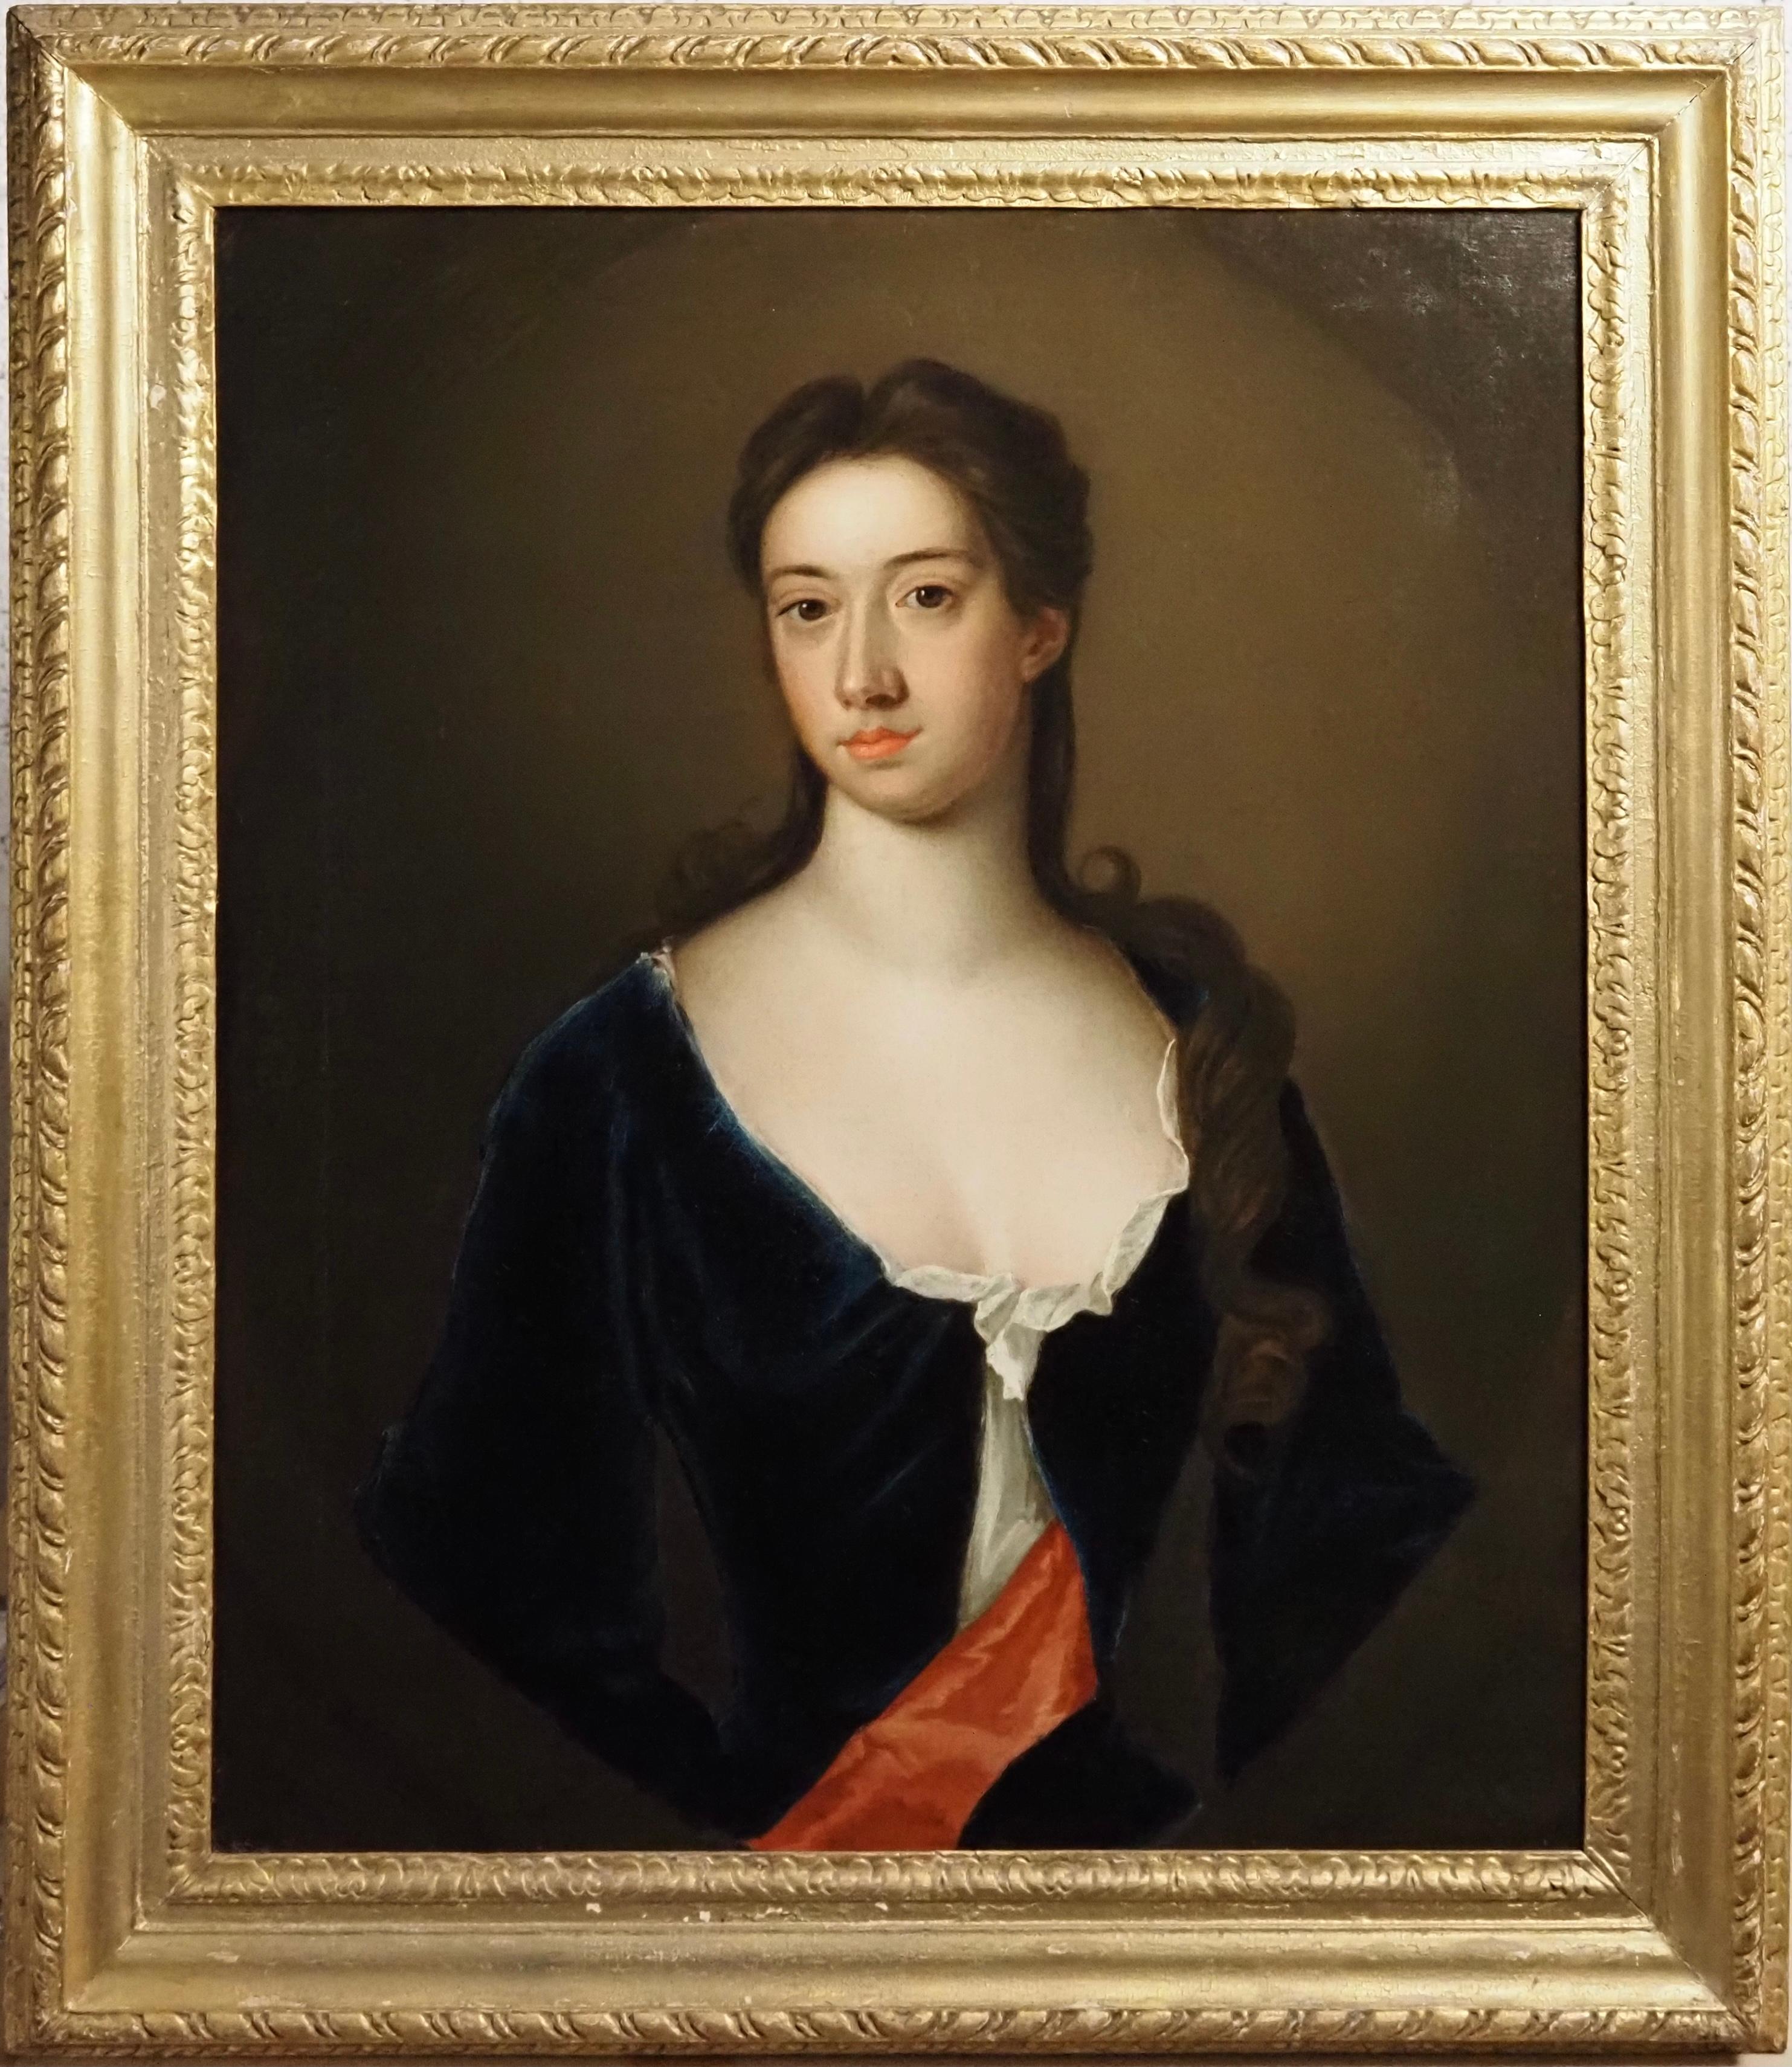 Joseph Highmore Portrait Painting - Portrait of Lady, in a blue dress with a red sash